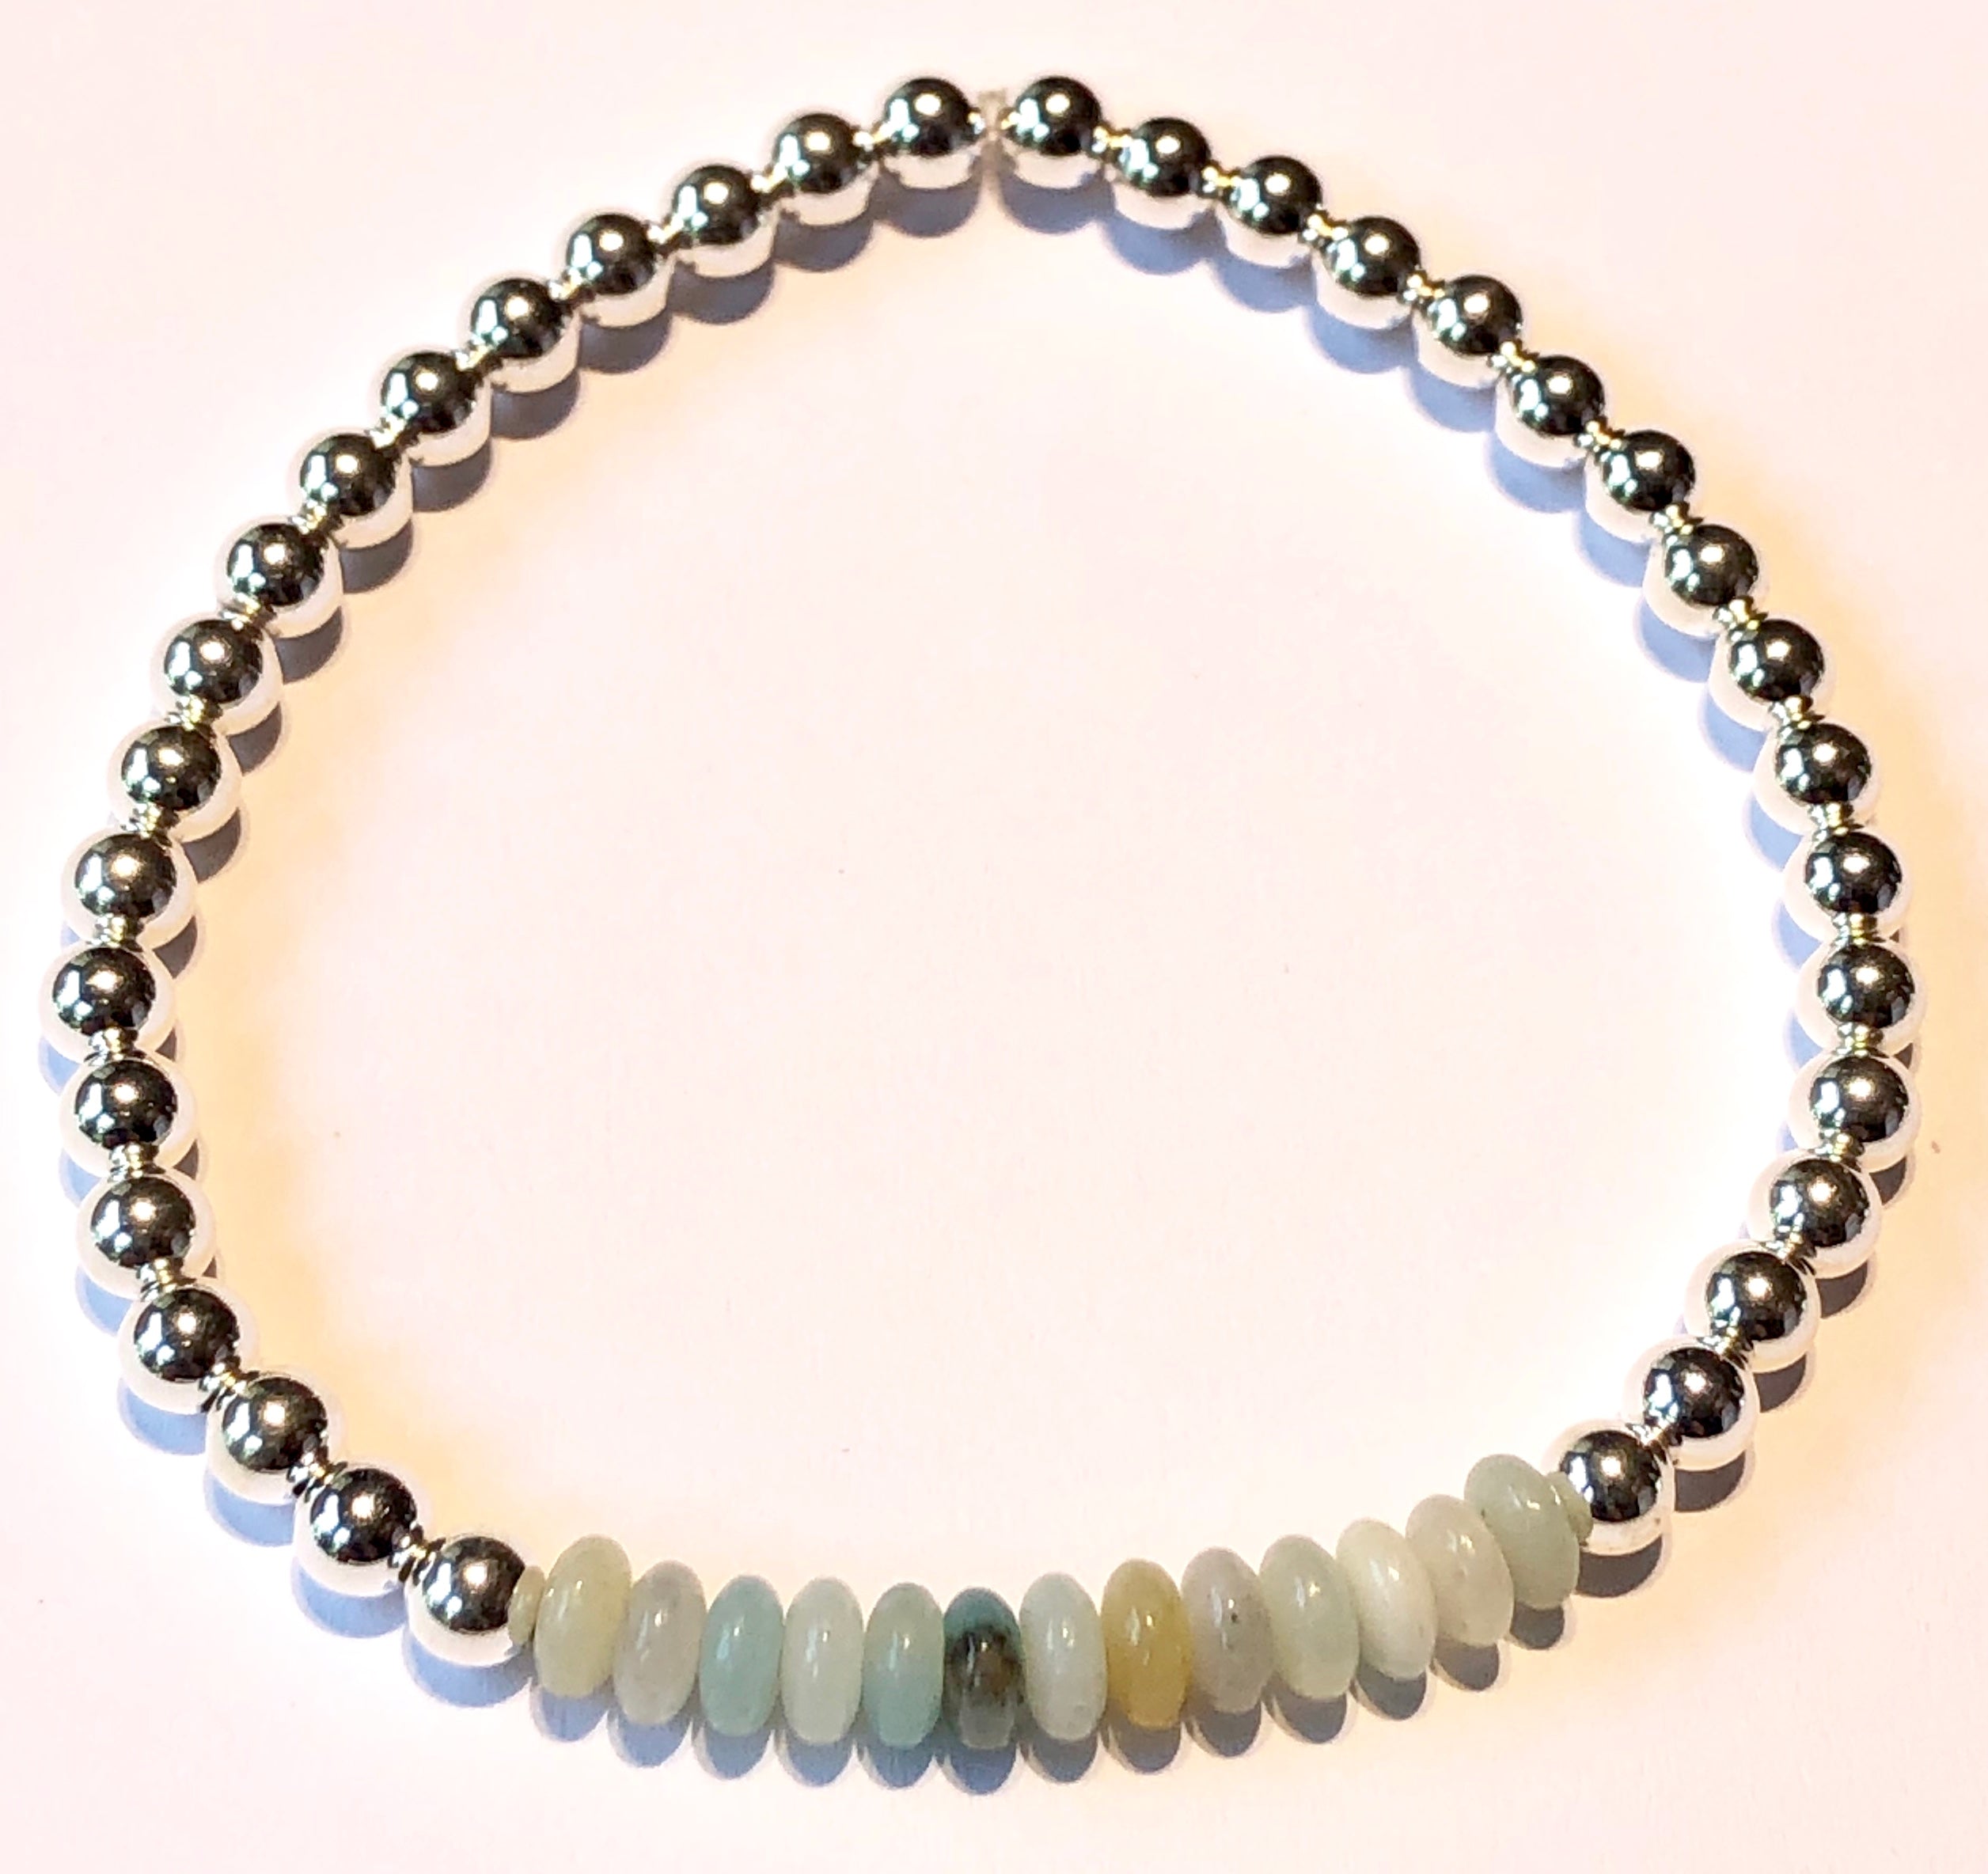 4mm Sterling Silver Bead Bracelet with Amazonite Bead Cluster